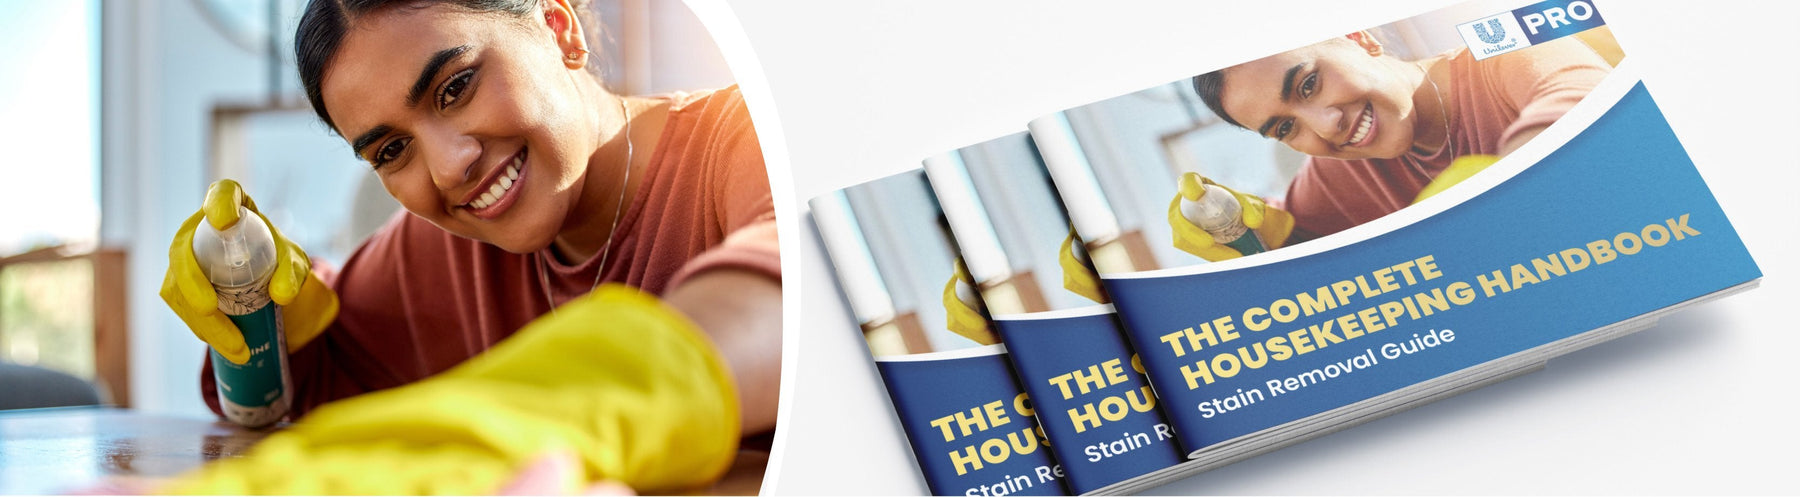 Unilever Professional Launches The Complete Housekeeping Handbook: Stain Removal Guide - Unilever Professional India